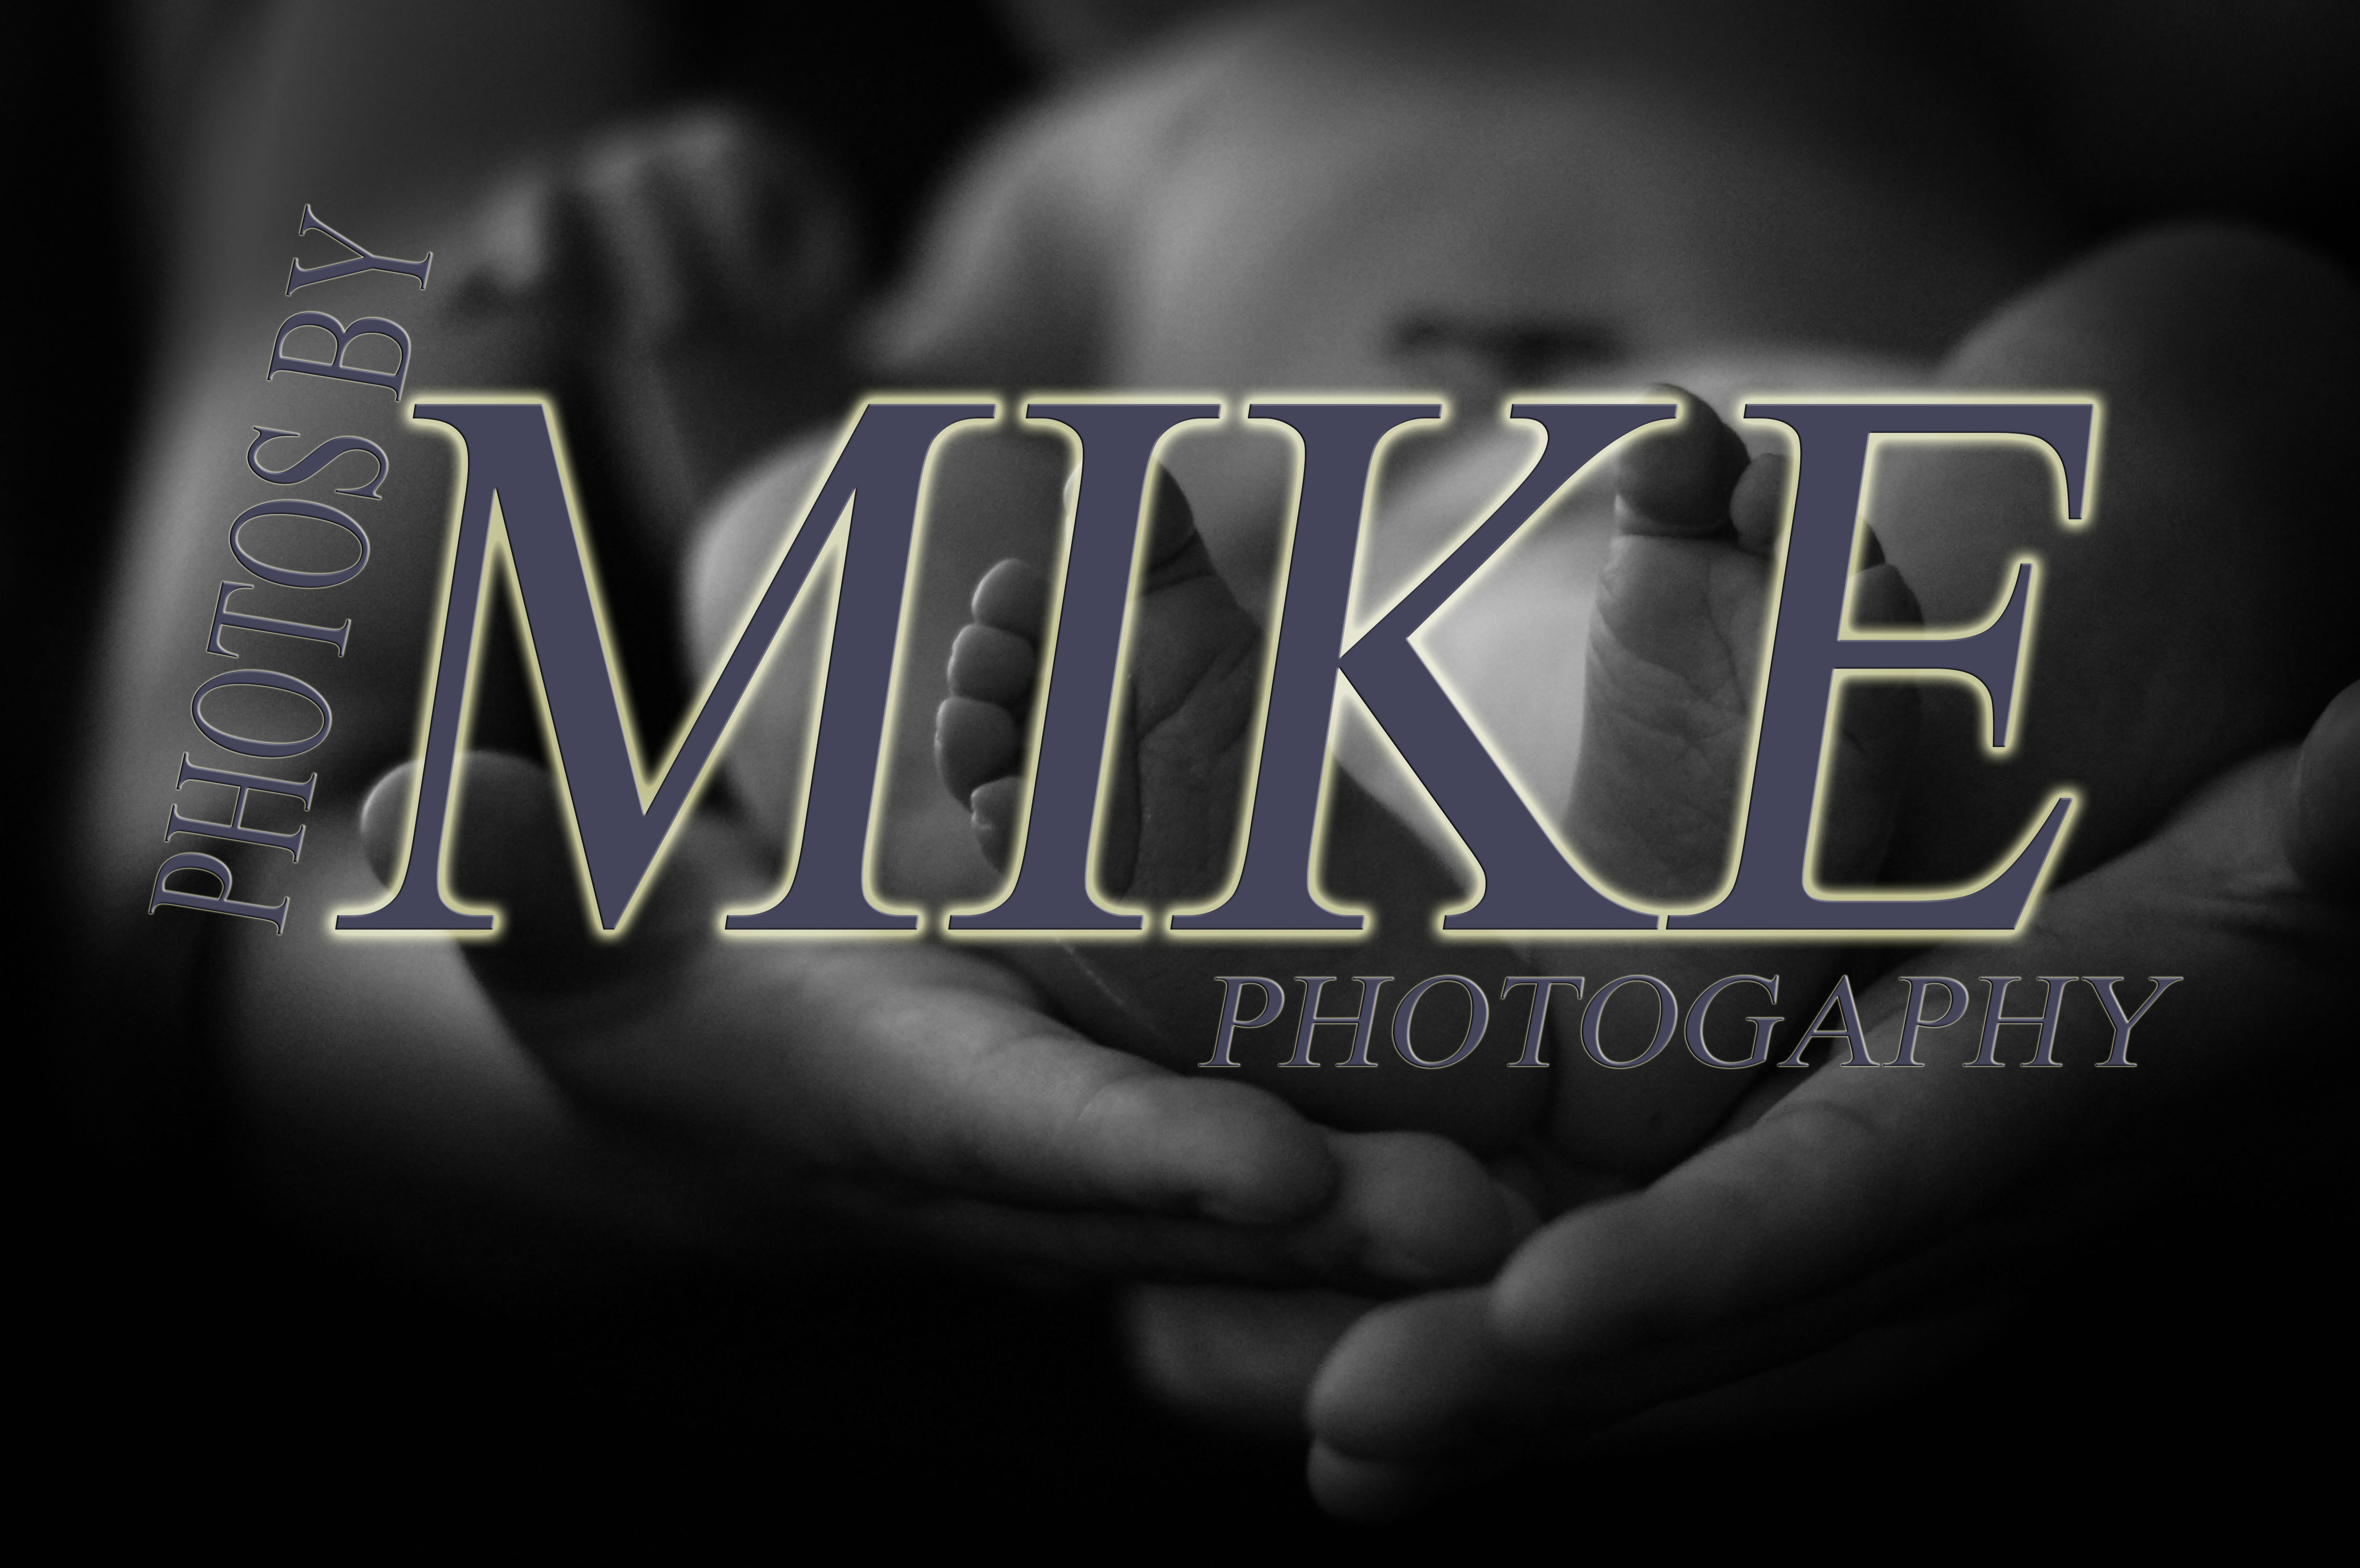 Photo’s by Mike